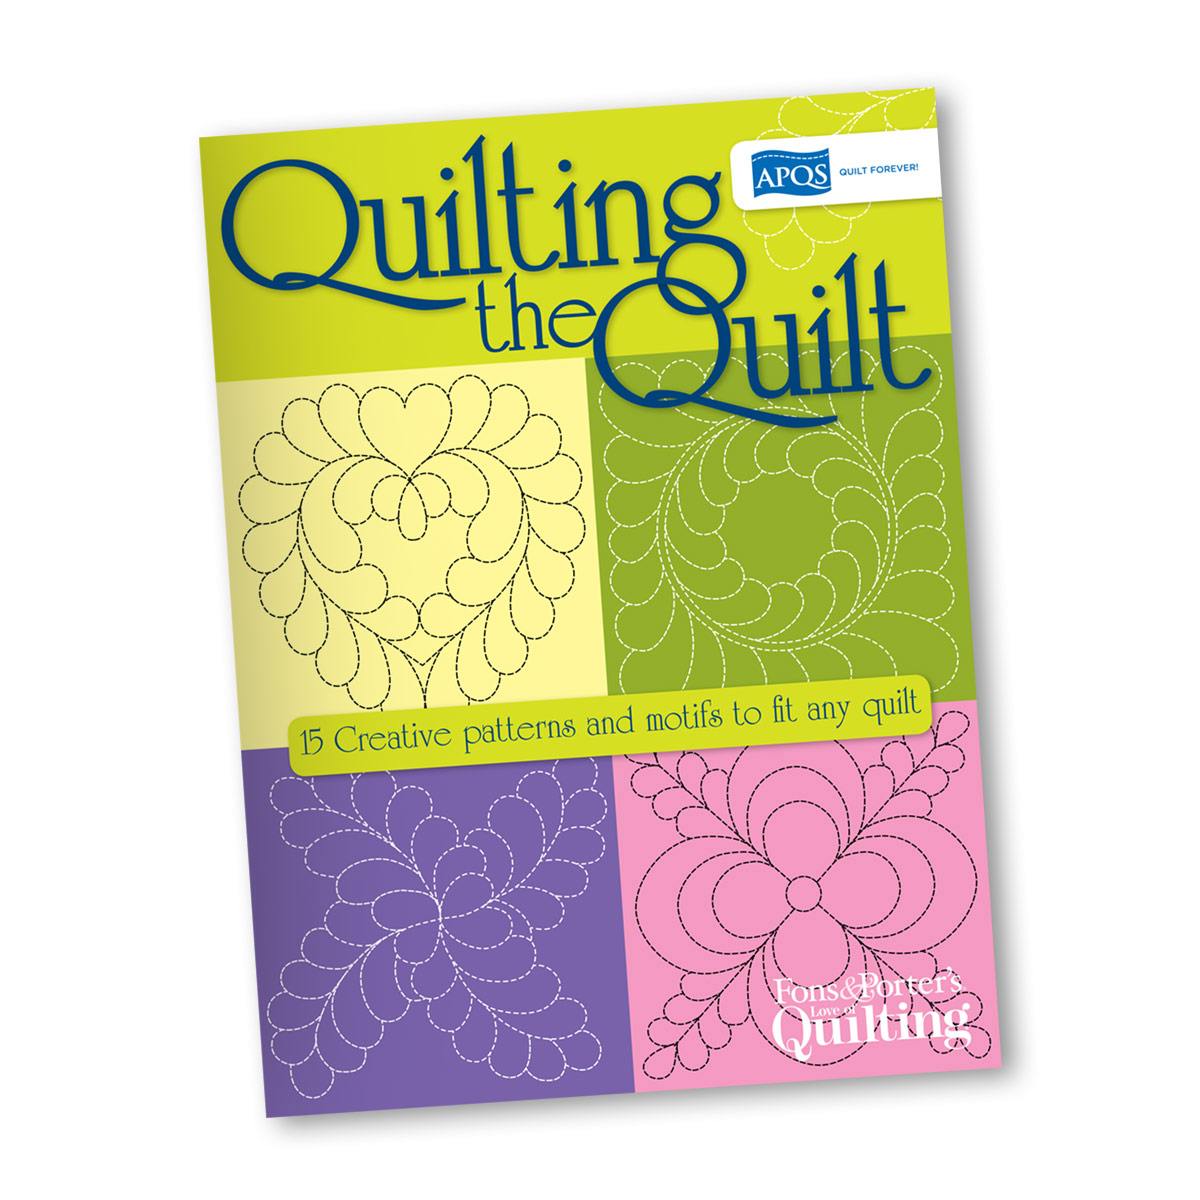 Quilting the Quilt